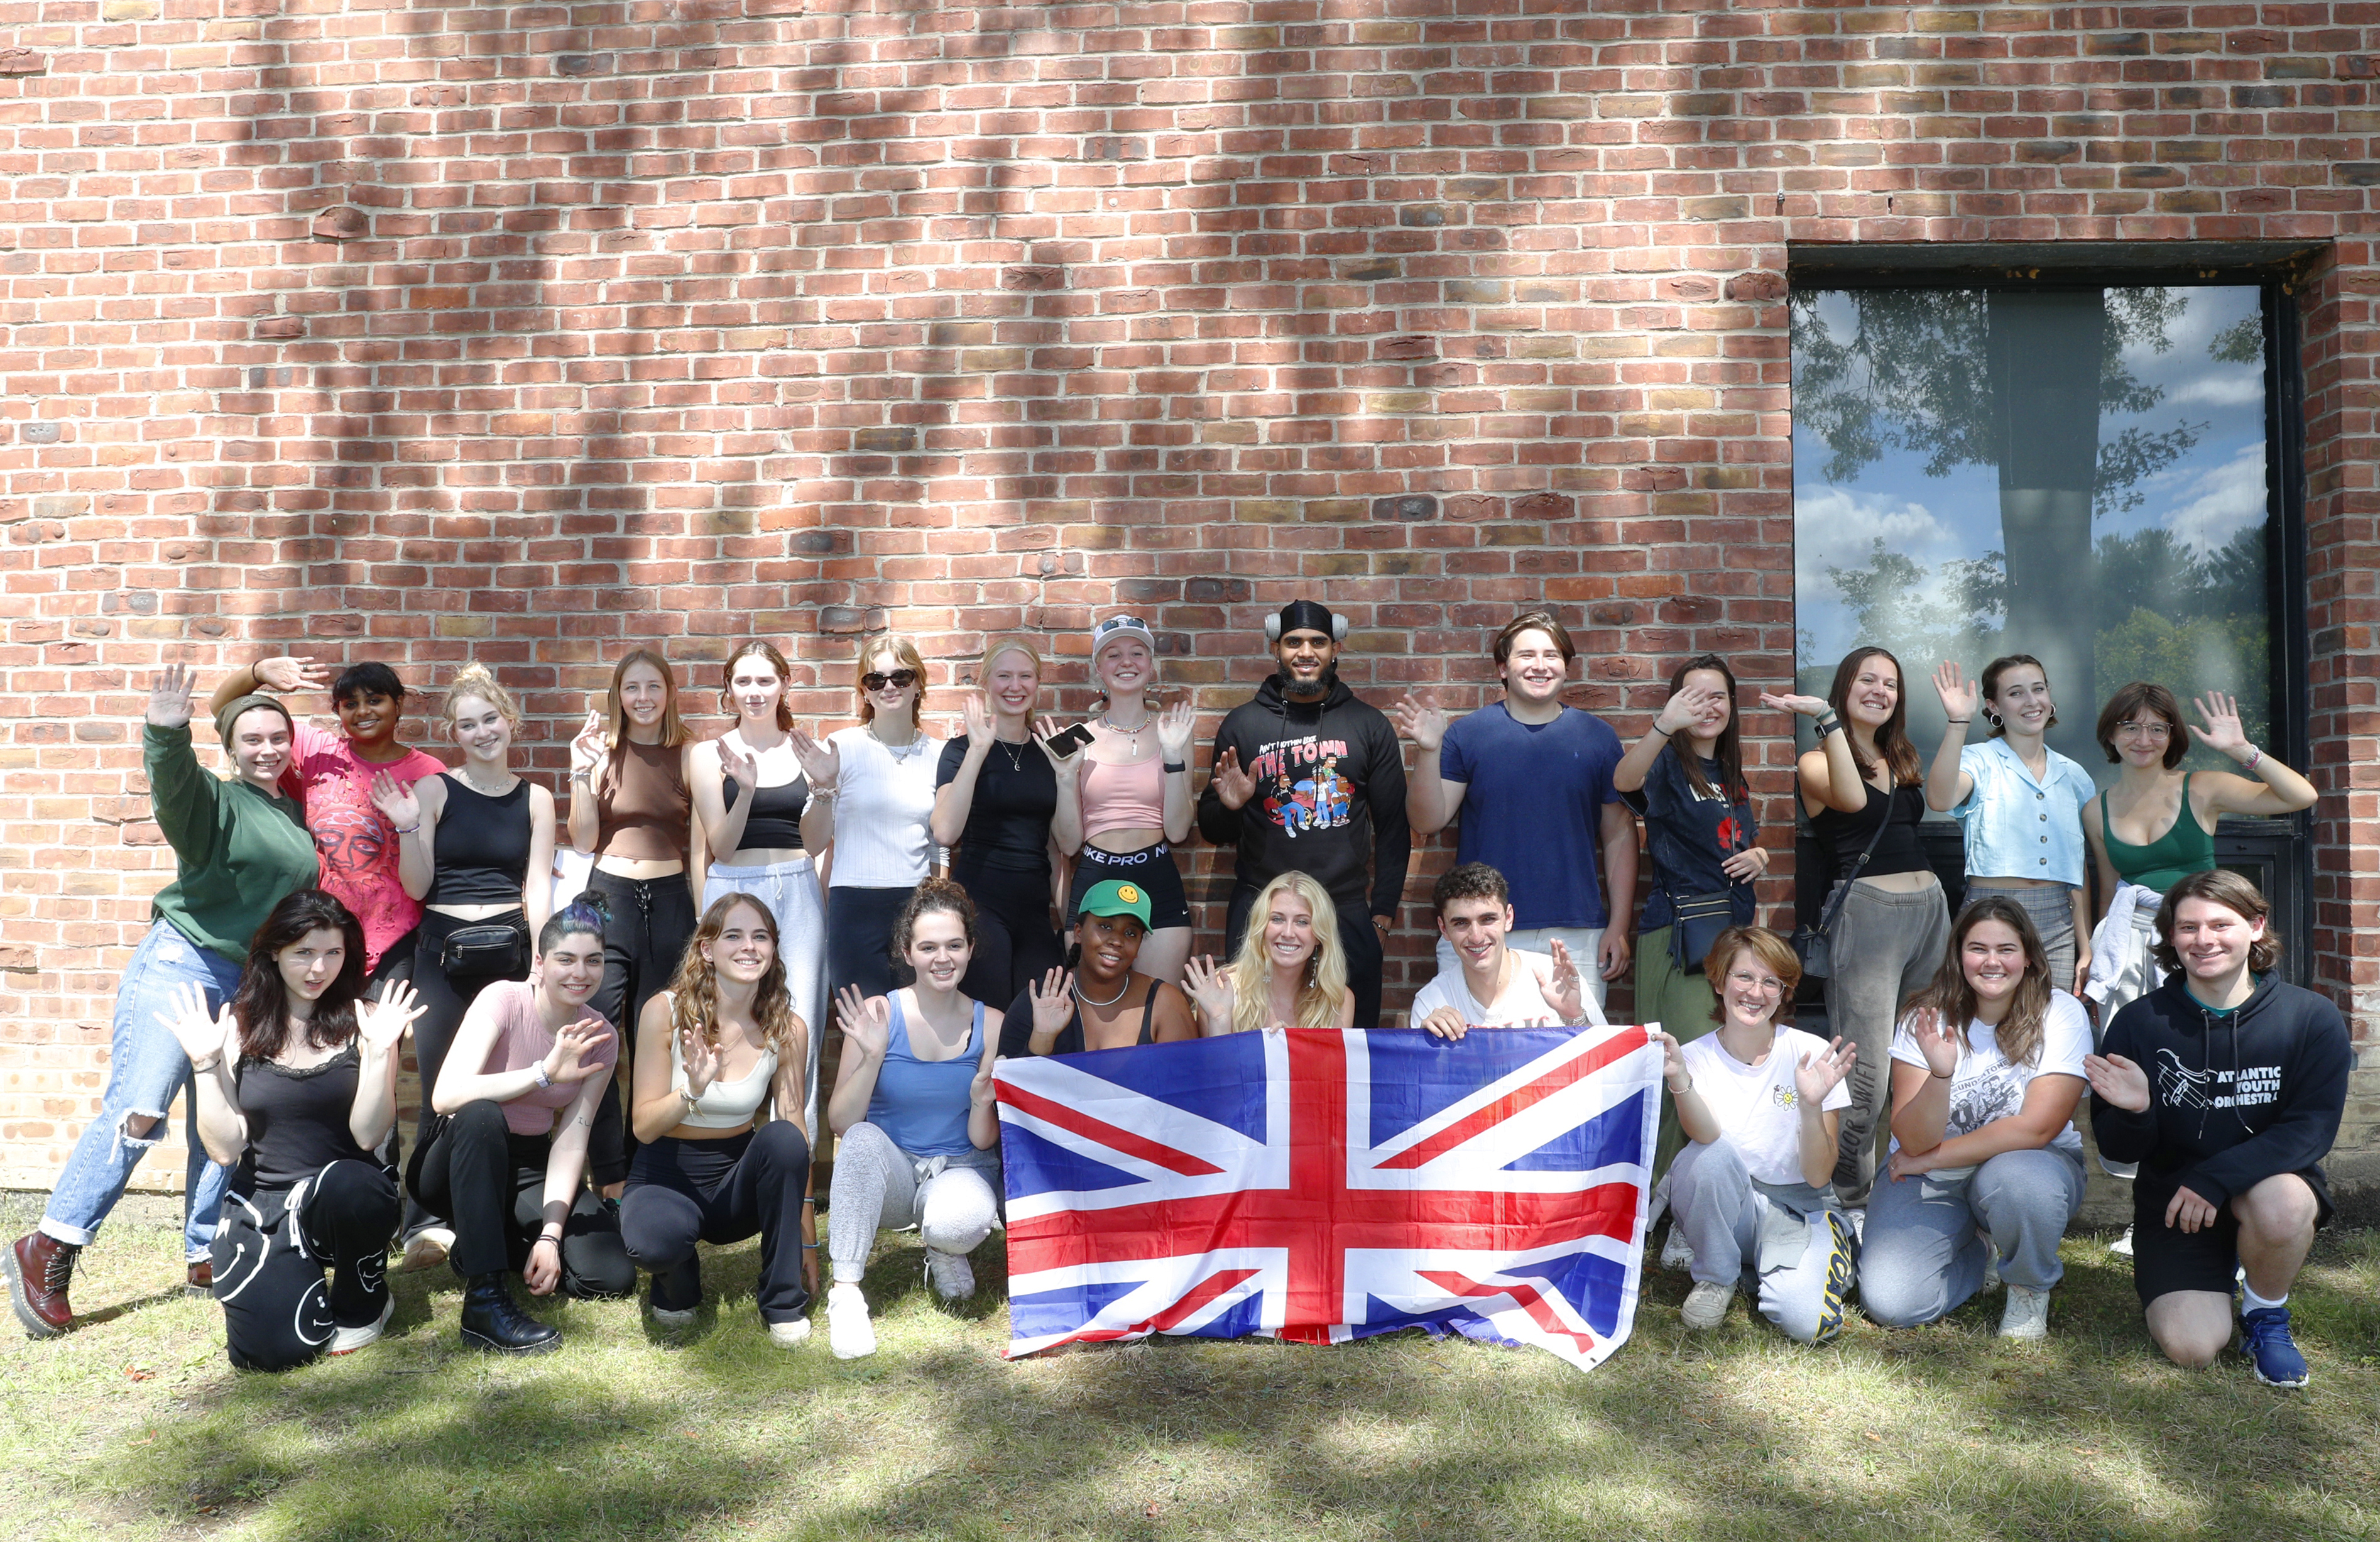 Students pose for a photo before leaving campus for London.